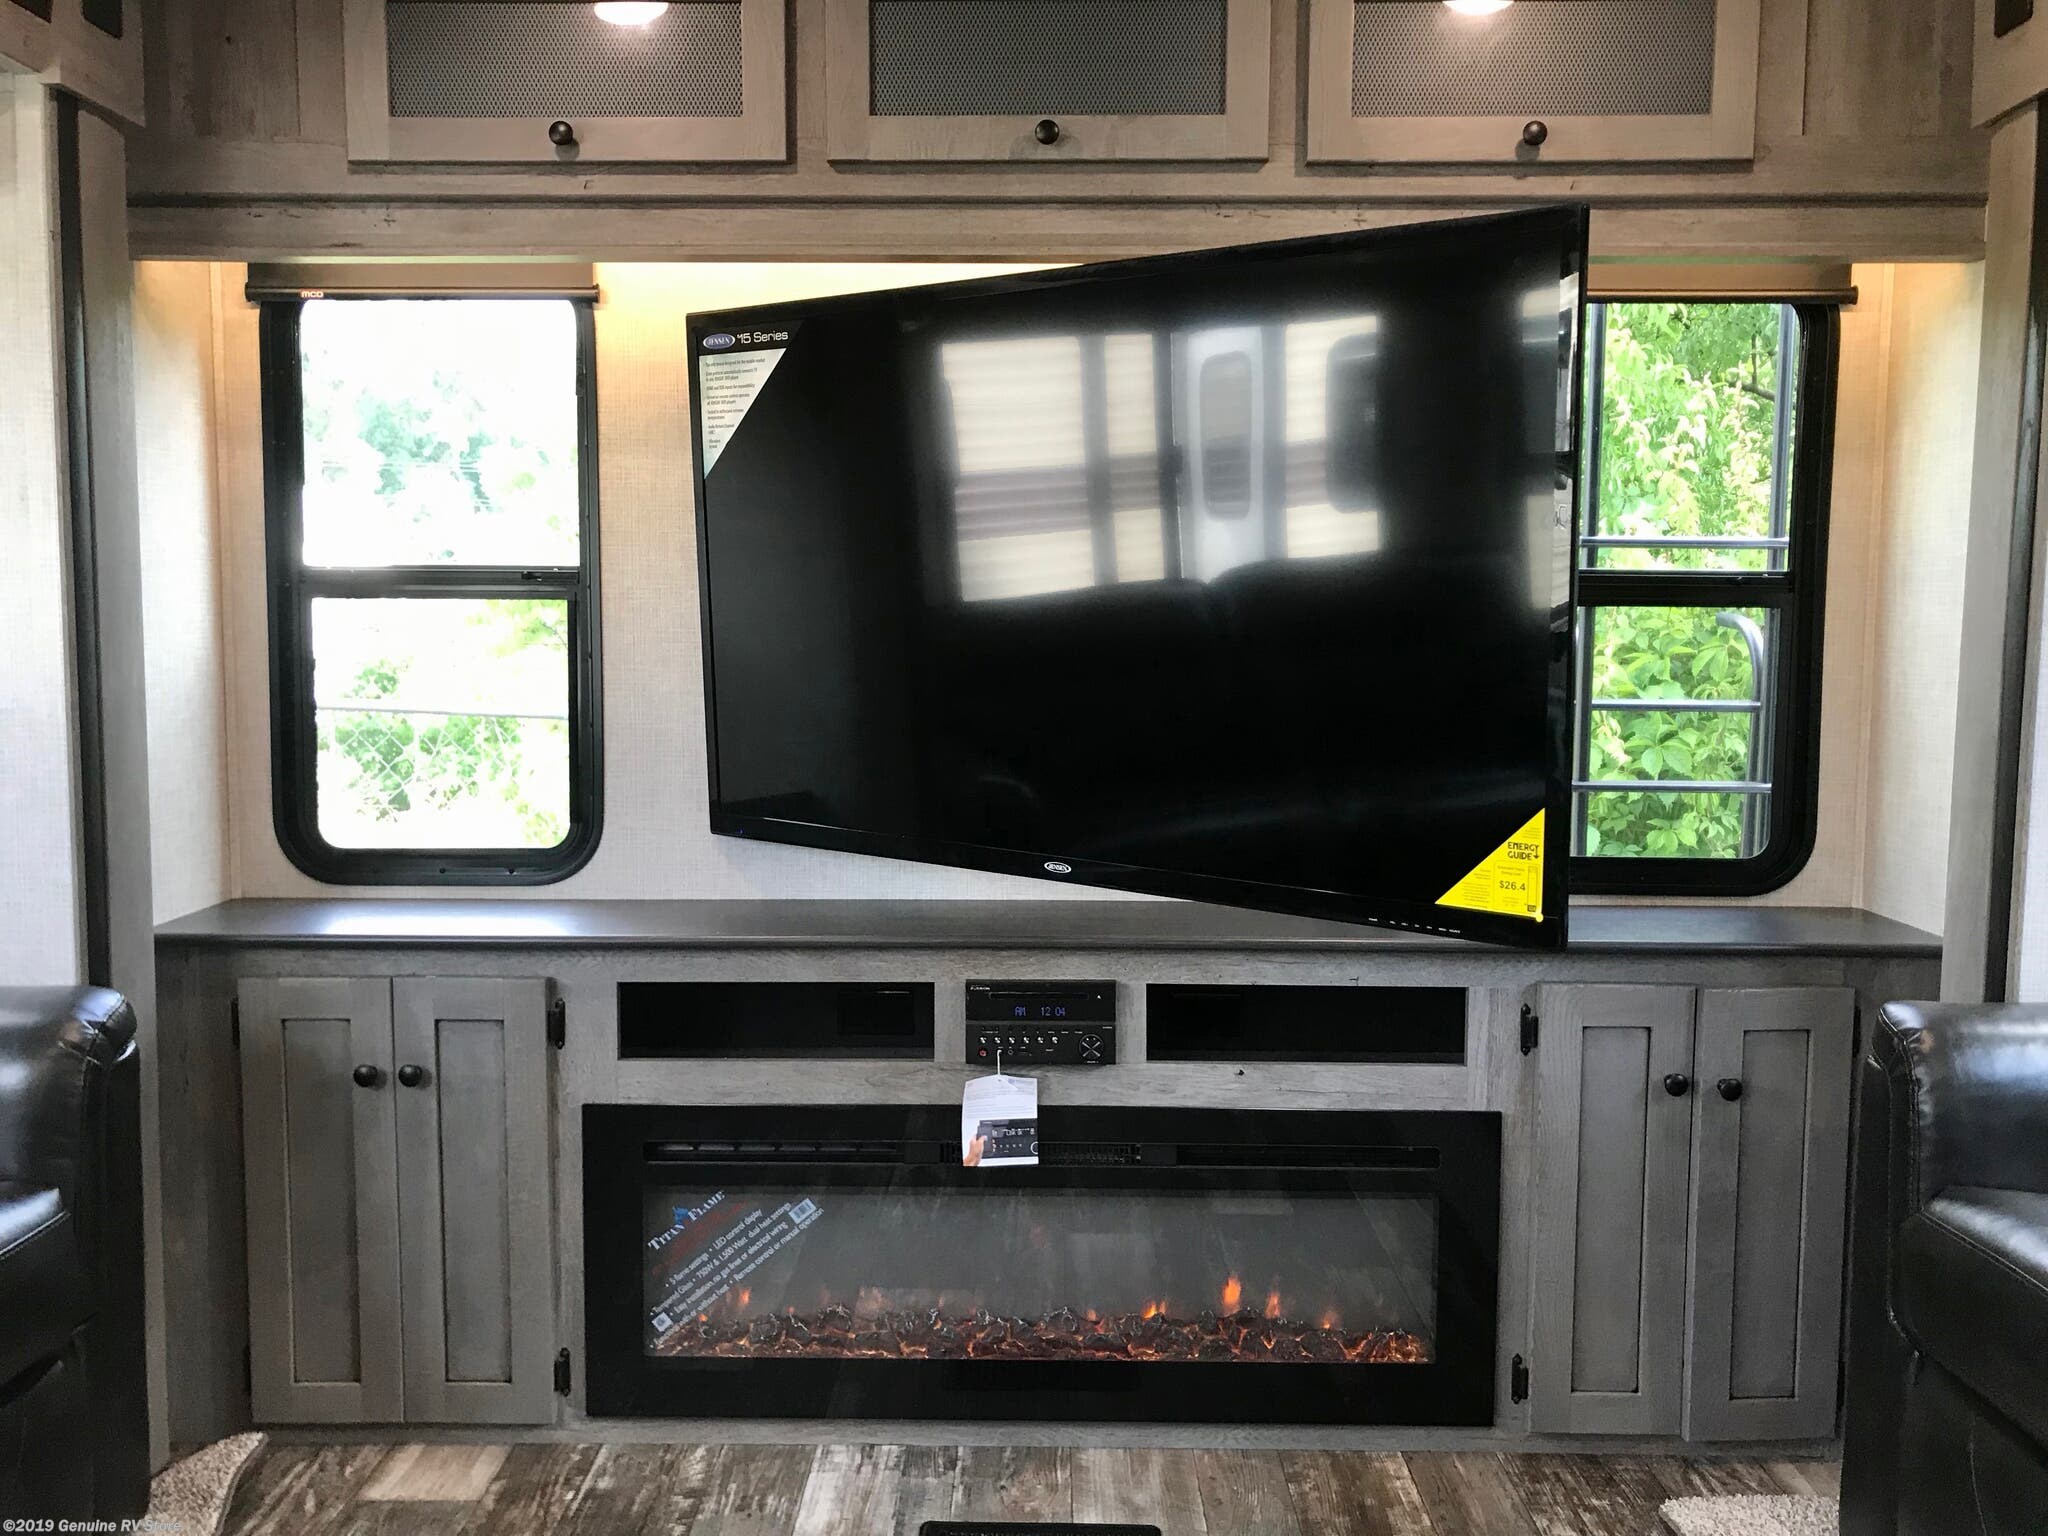 Titan Flame Rv Fireplace Beautiful 2019 Keystone Rv Outback 341rd for Sale In Nacogdoches Tx